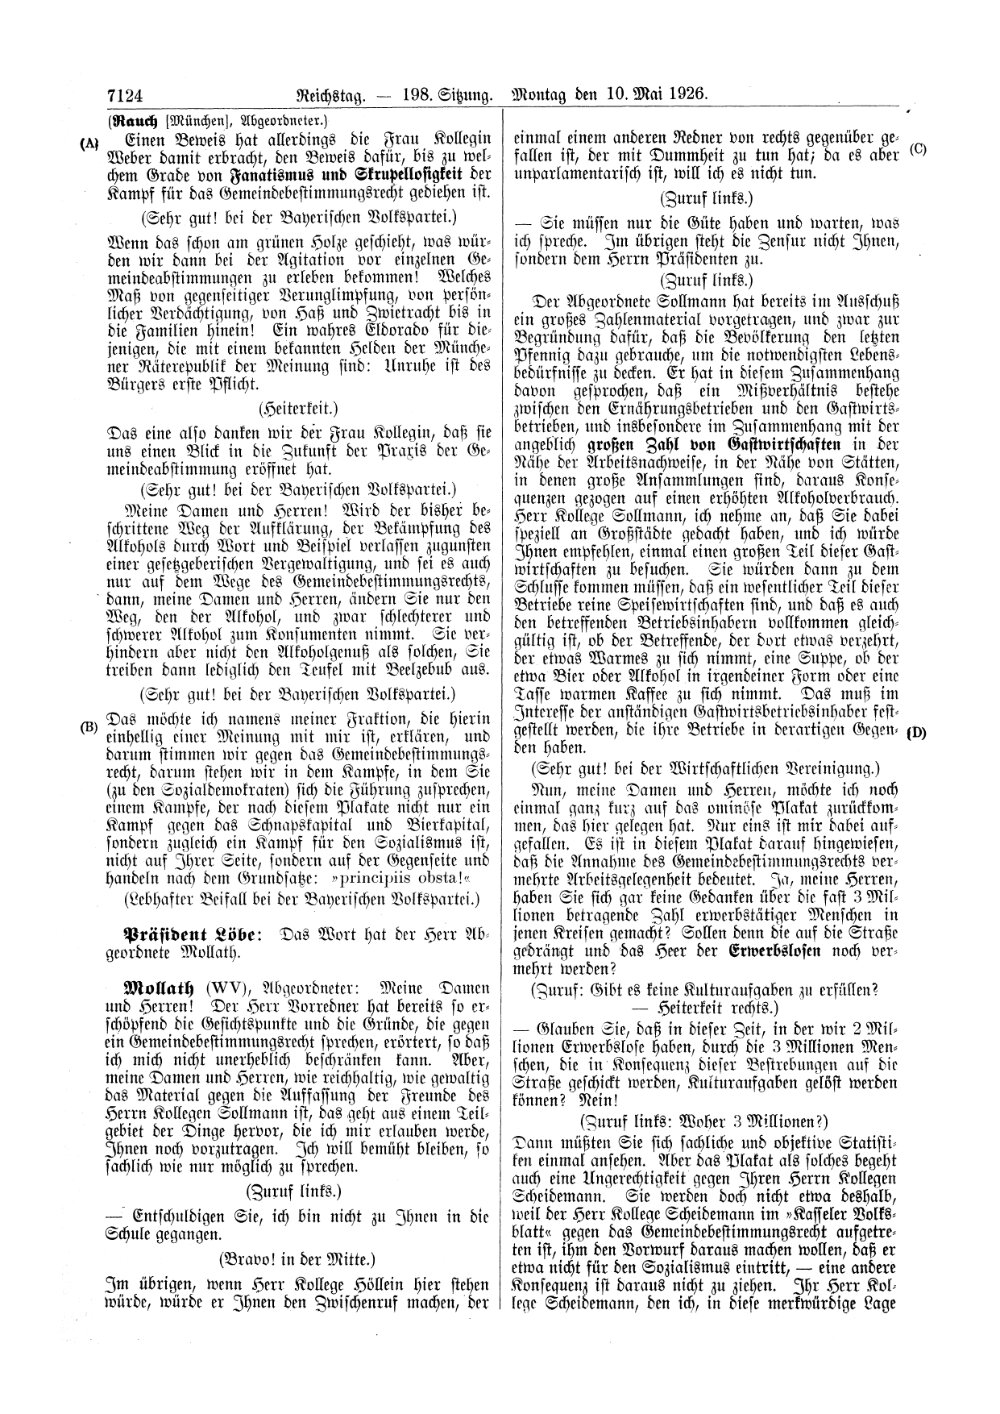 Scan of page 7124